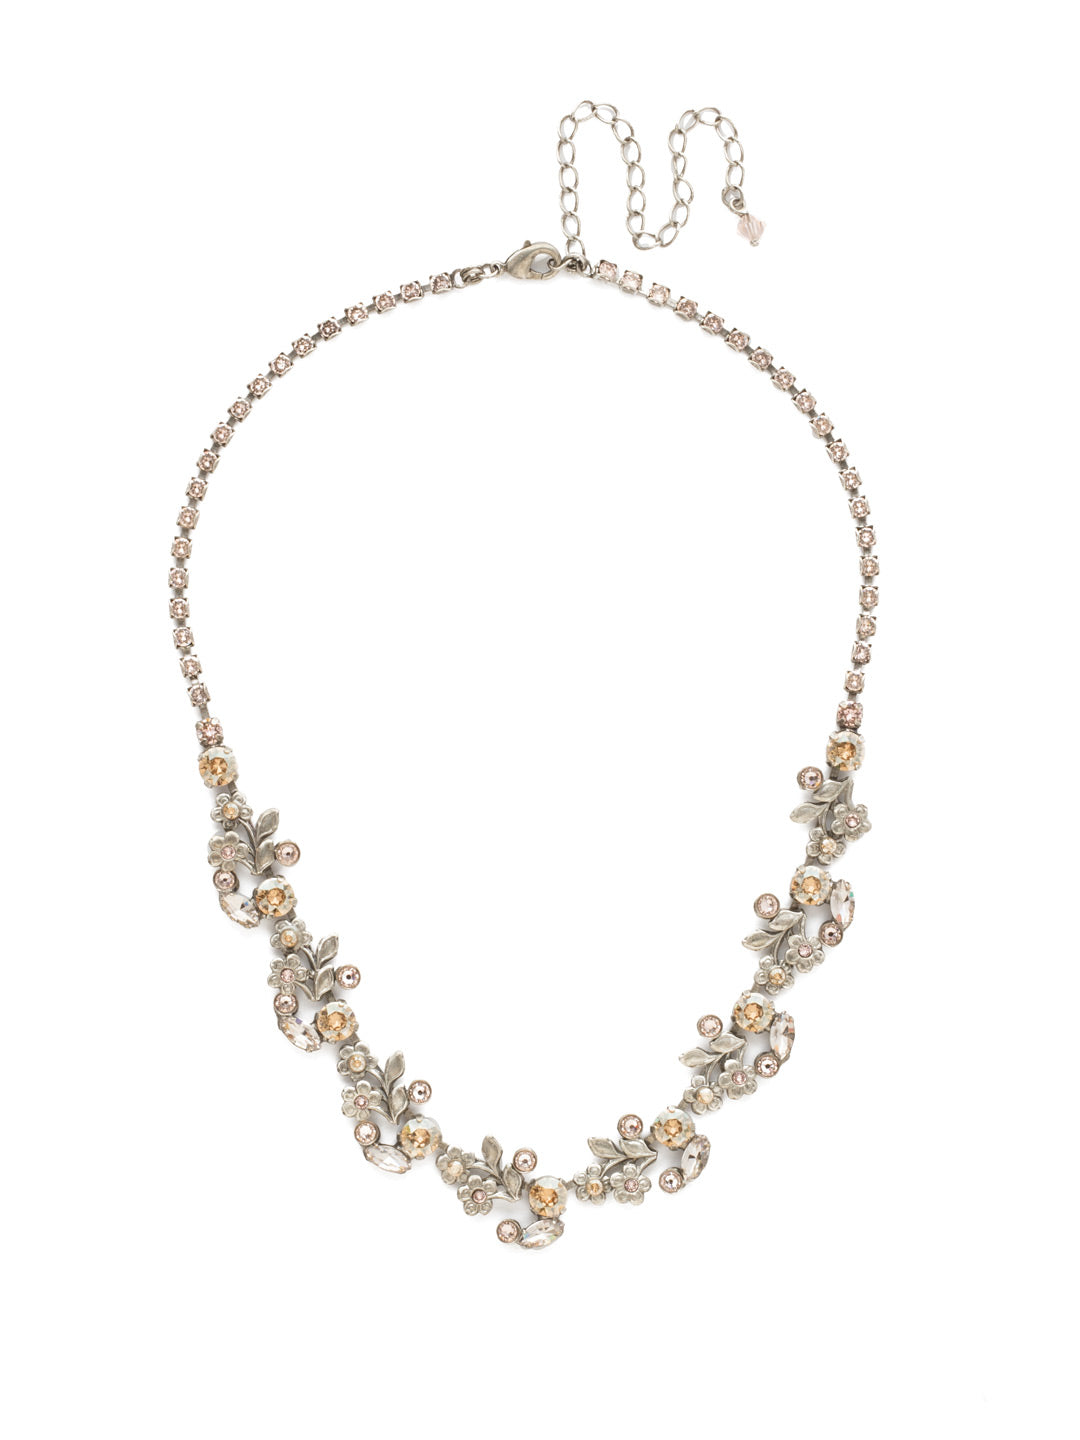 Linden Necklace Tennis Necklace - NDT19ASSBL - <p>Feminine, floral metalwork is accented with a mixture of round and navette crystals. From Sorrelli's Satin Blush collection in our Antique Silver-tone finish.</p>